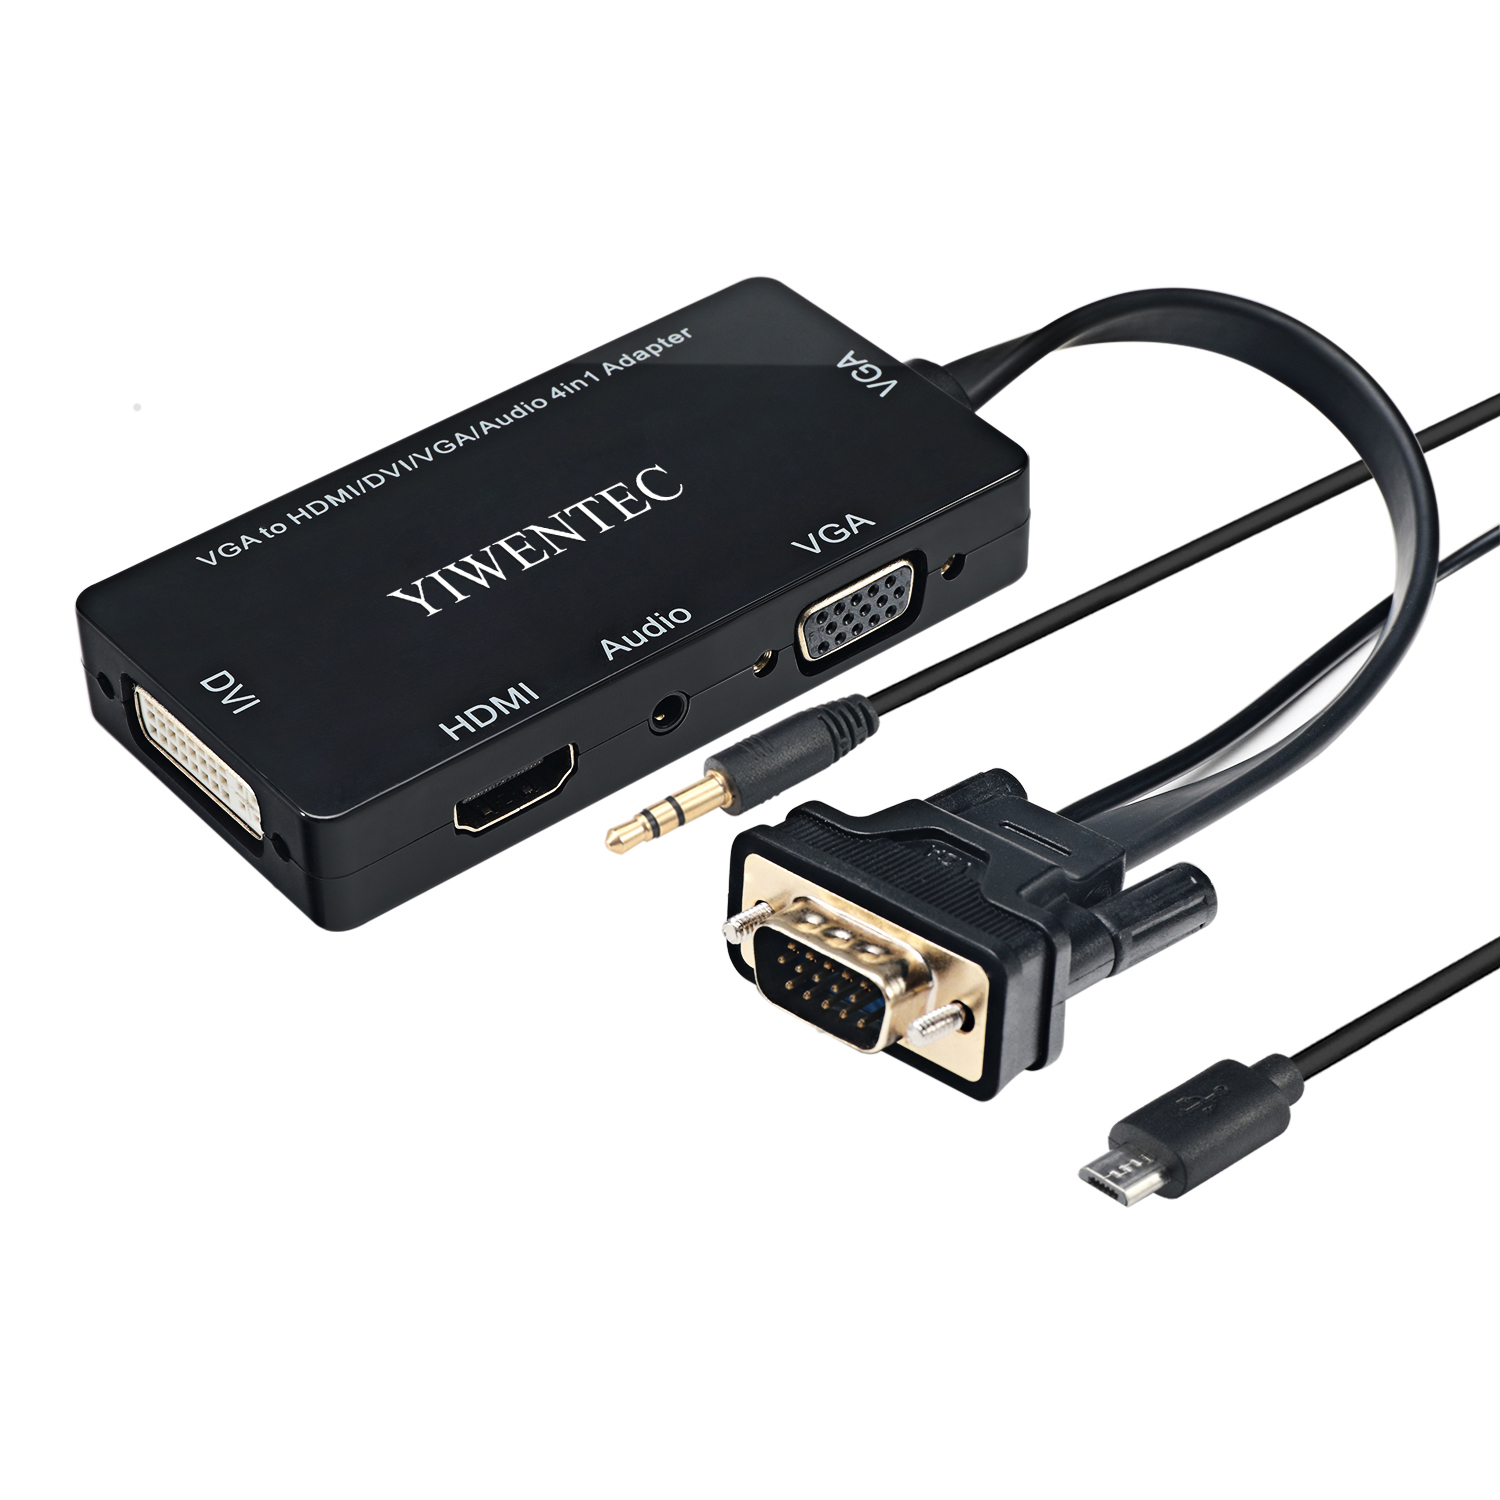 Eenvoud merk op uitbreiden YIWENTEC VGA Male to VGA HDMI DVI Female 3IN1 Adapter Converter for Desktop  Laptop VGA Graphics Card with Micro USB Power Cable and Audio 3.5mm Jack  Connect simultaneously E0409-HDMI To HDMI VGA